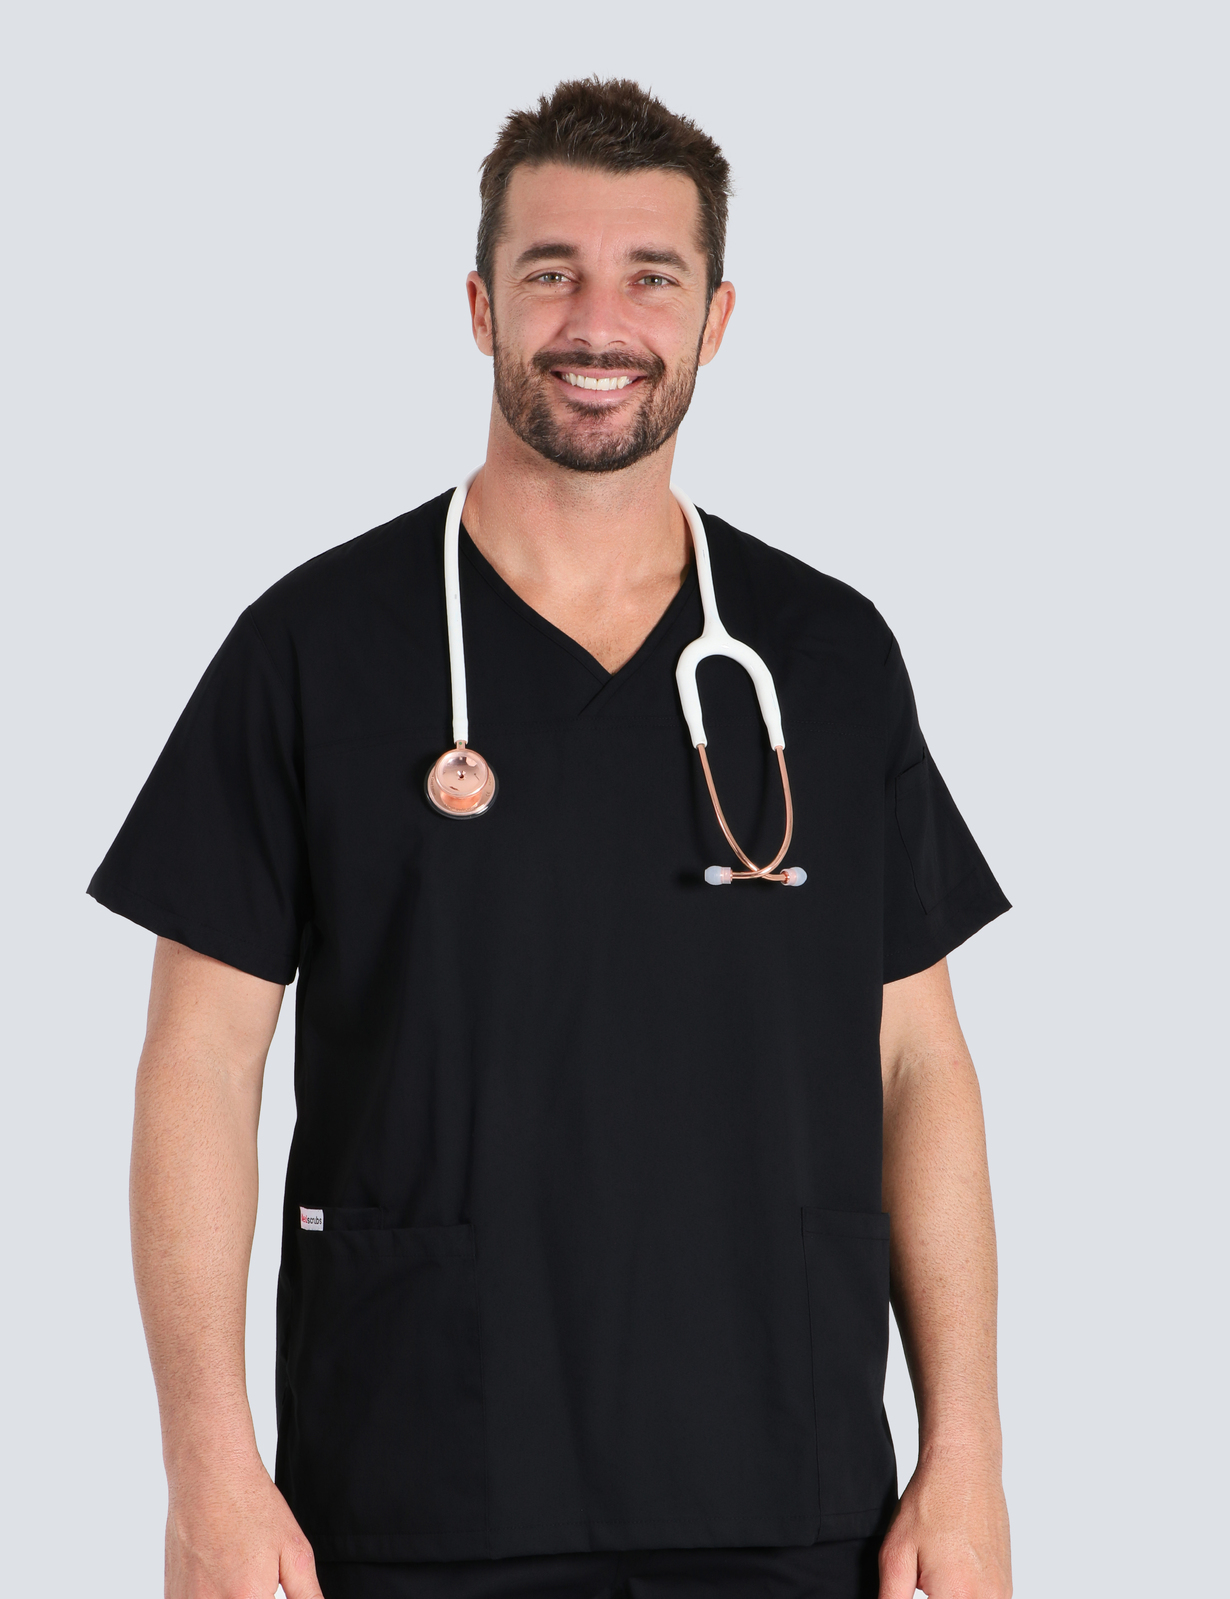 North Shore Private Radiologist Uniform Top Only Bundle (Men's Fit Solid Top in Black + Logo) 